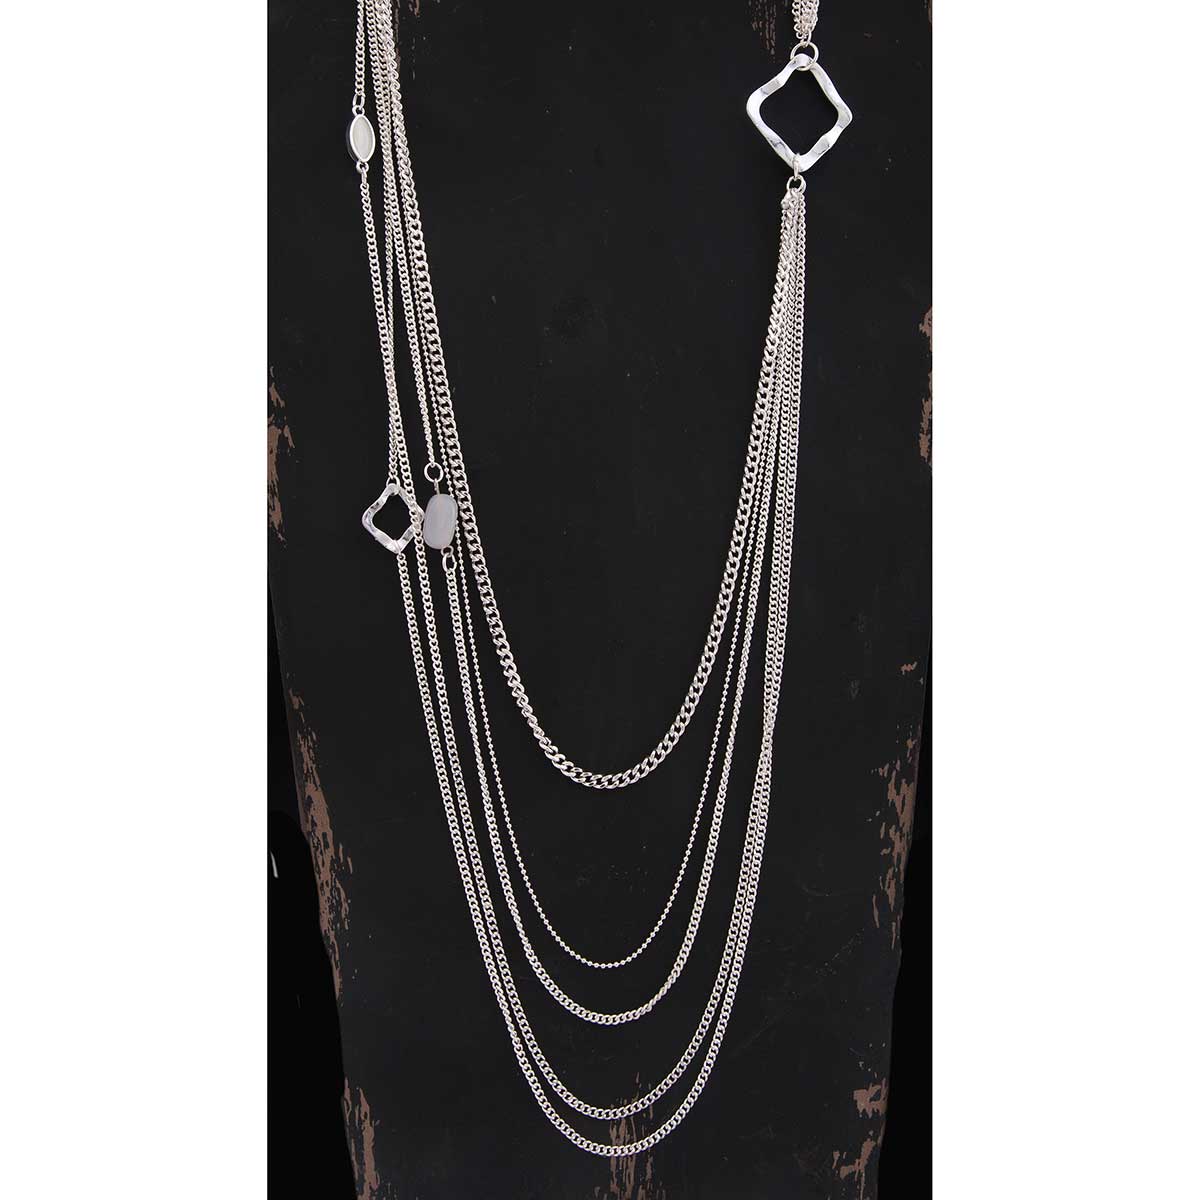 b70 NECKLACE MULTI CHAIN WITH SQU 40IN